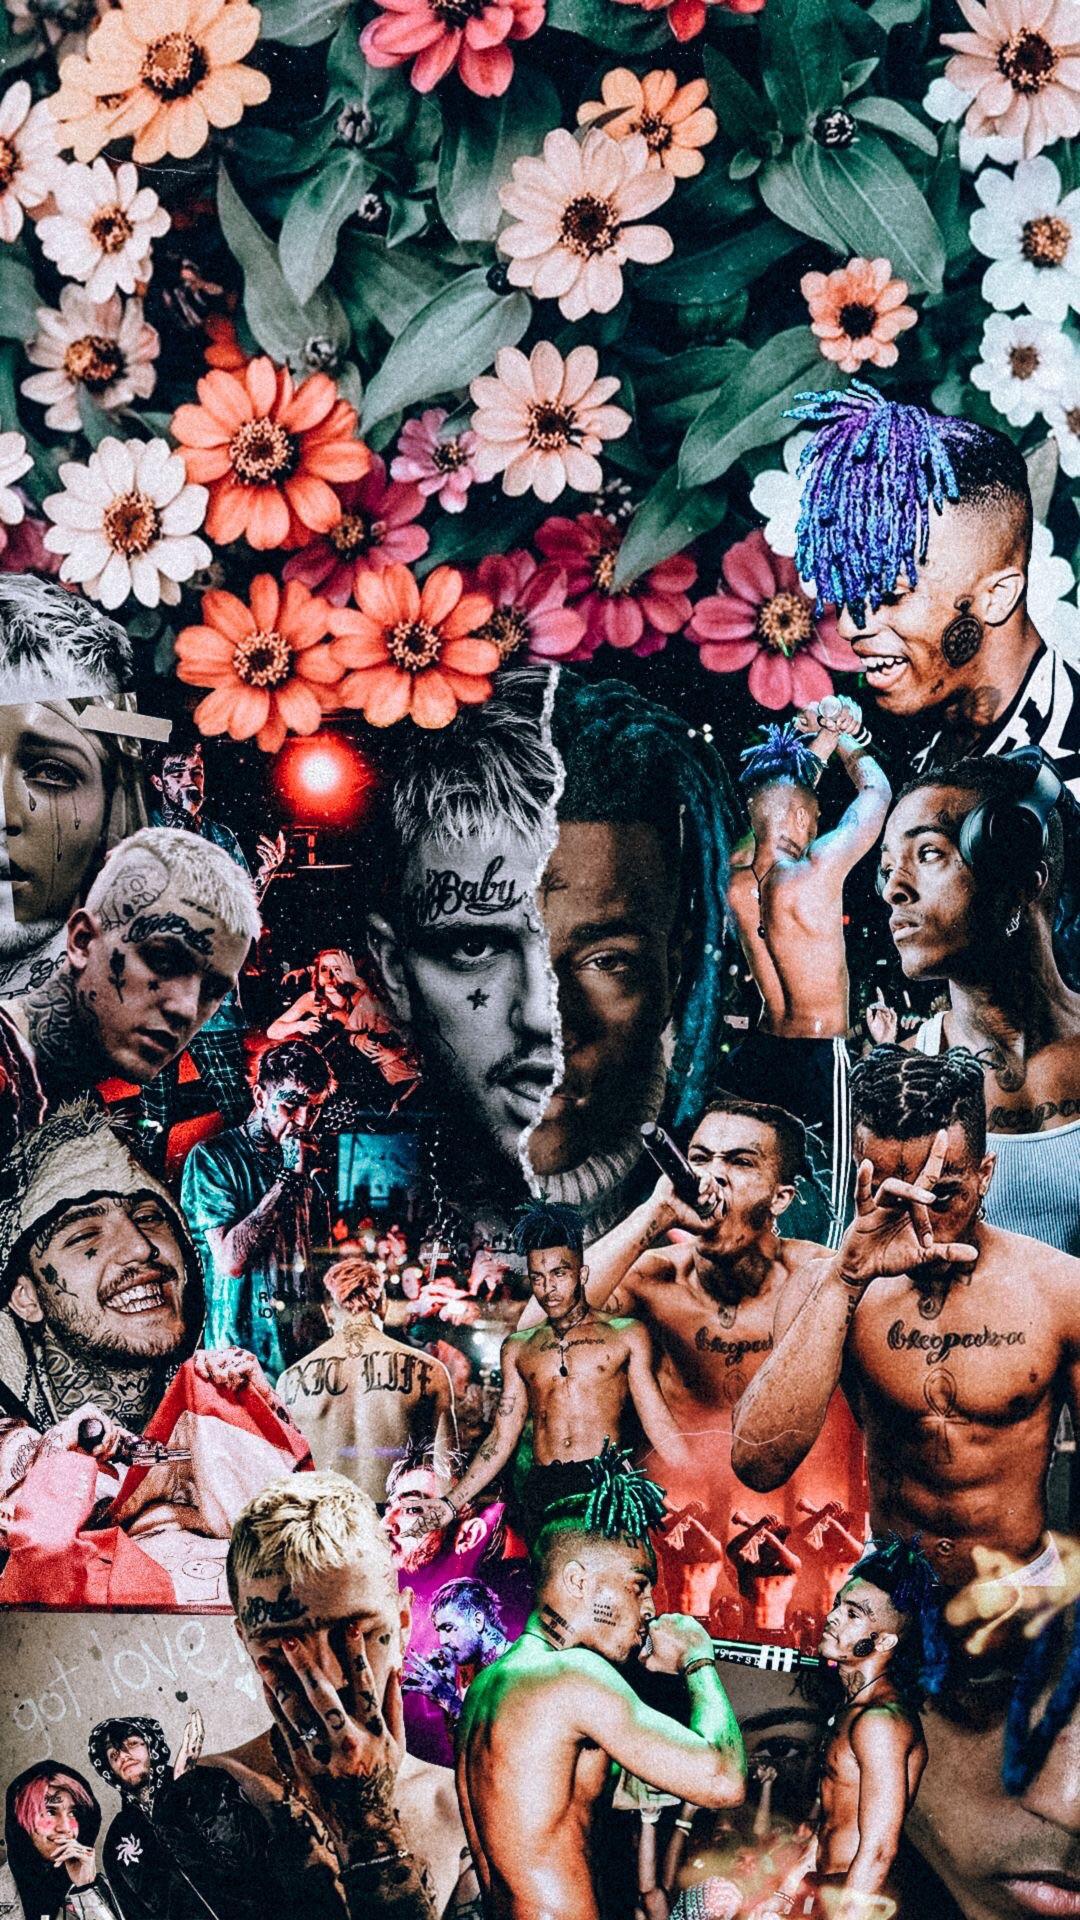 XXXTENTACION and LiL PeeP wallpaper! Found this dope shit! I love it and thought you guys would too! :)